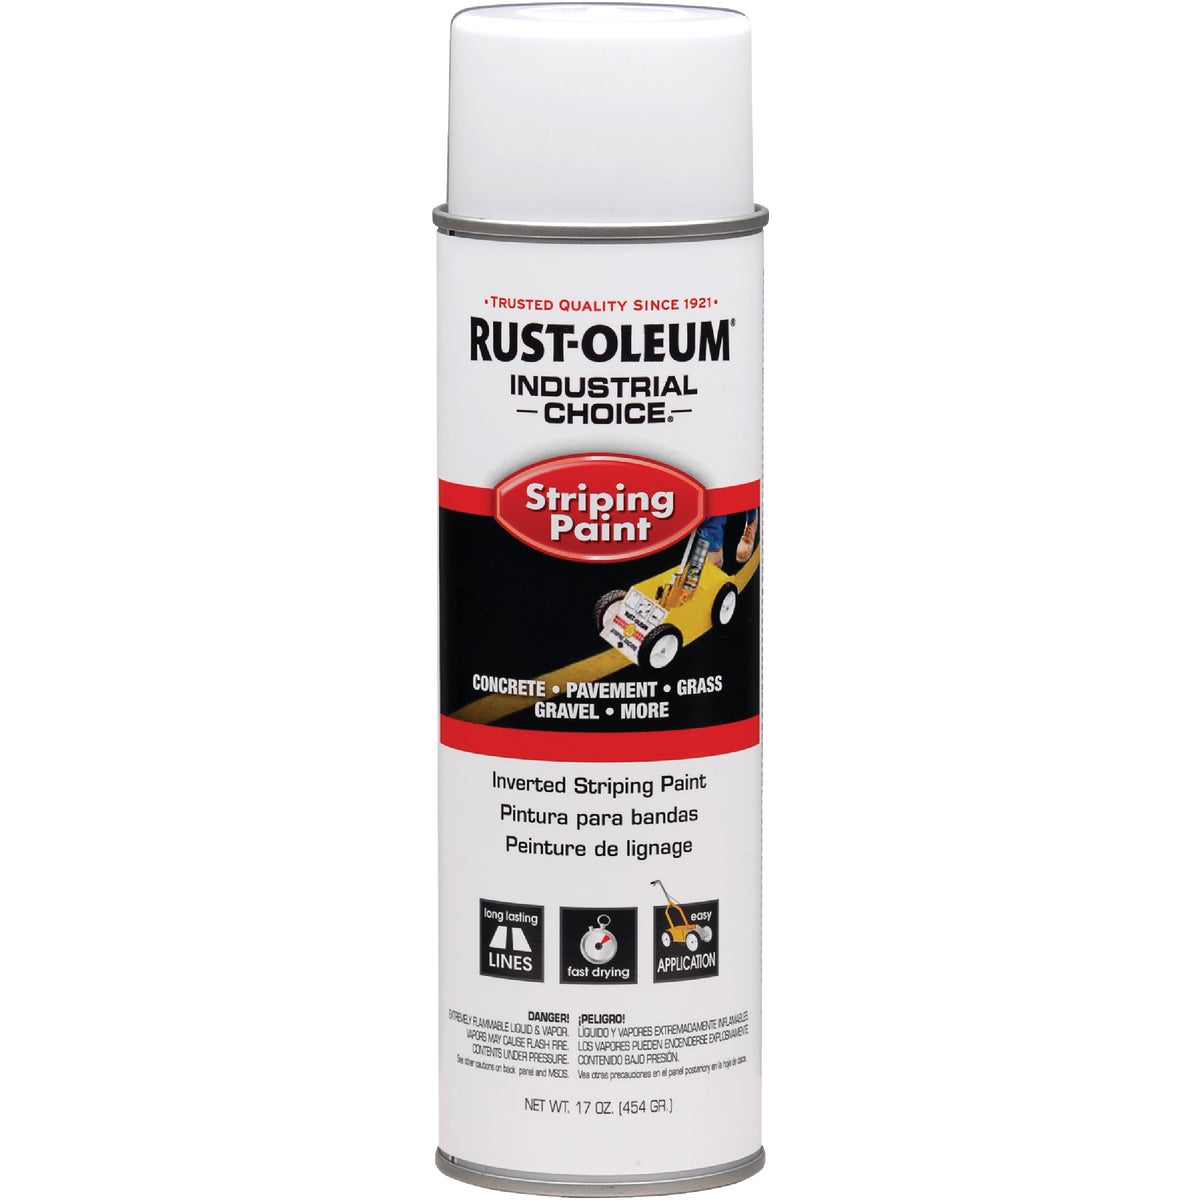 Rust-Oleum Industrial Choice White 17 Oz. Striping Paint 